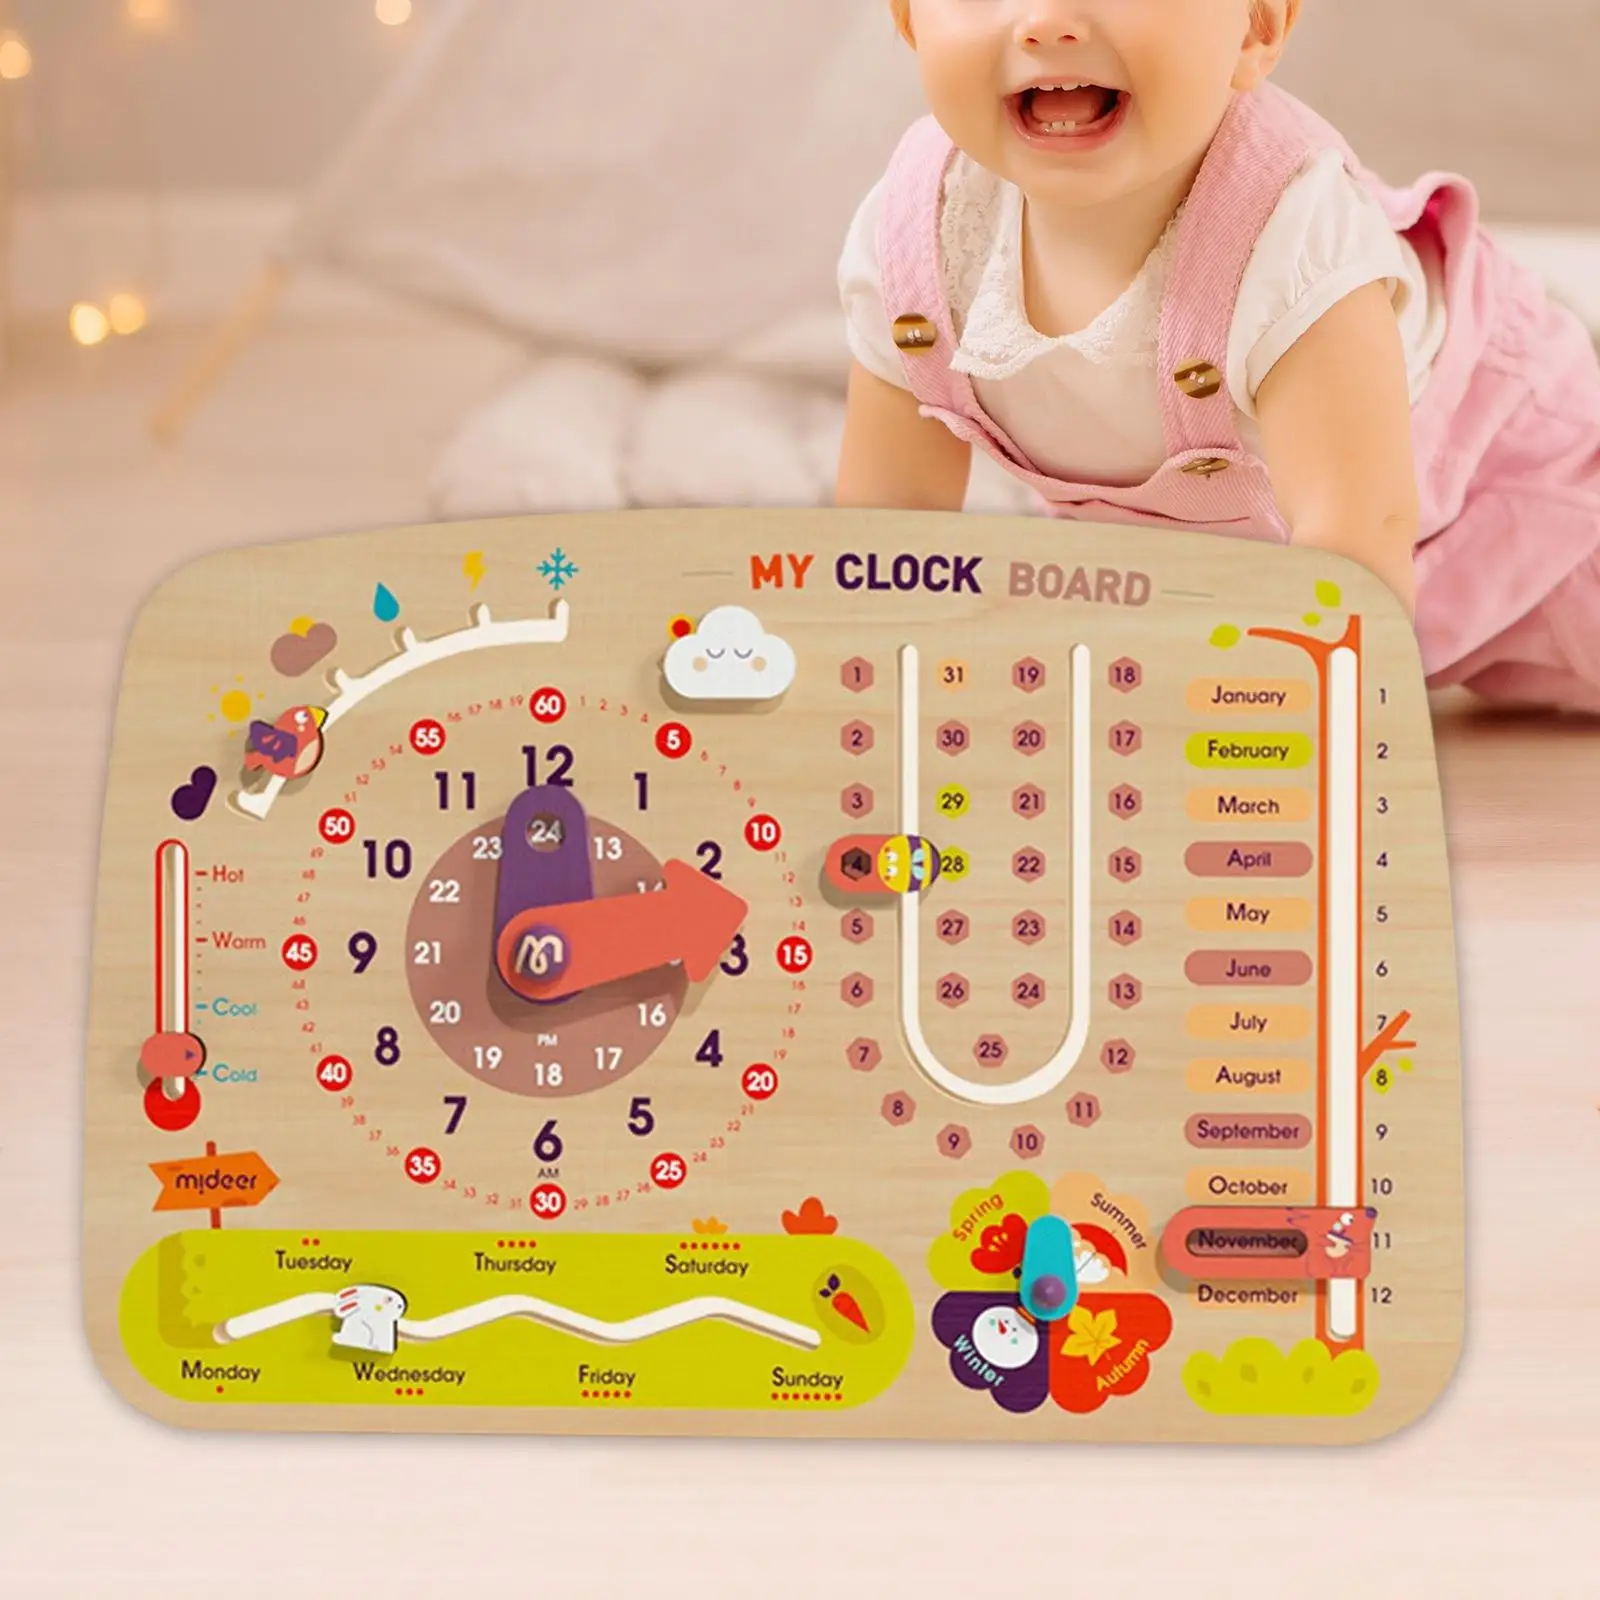 Kids Calendar Learning to Tell Time Teaching Clock Early Learning Toys Daily Calendar for Children Toddlers Kids Boys Girls